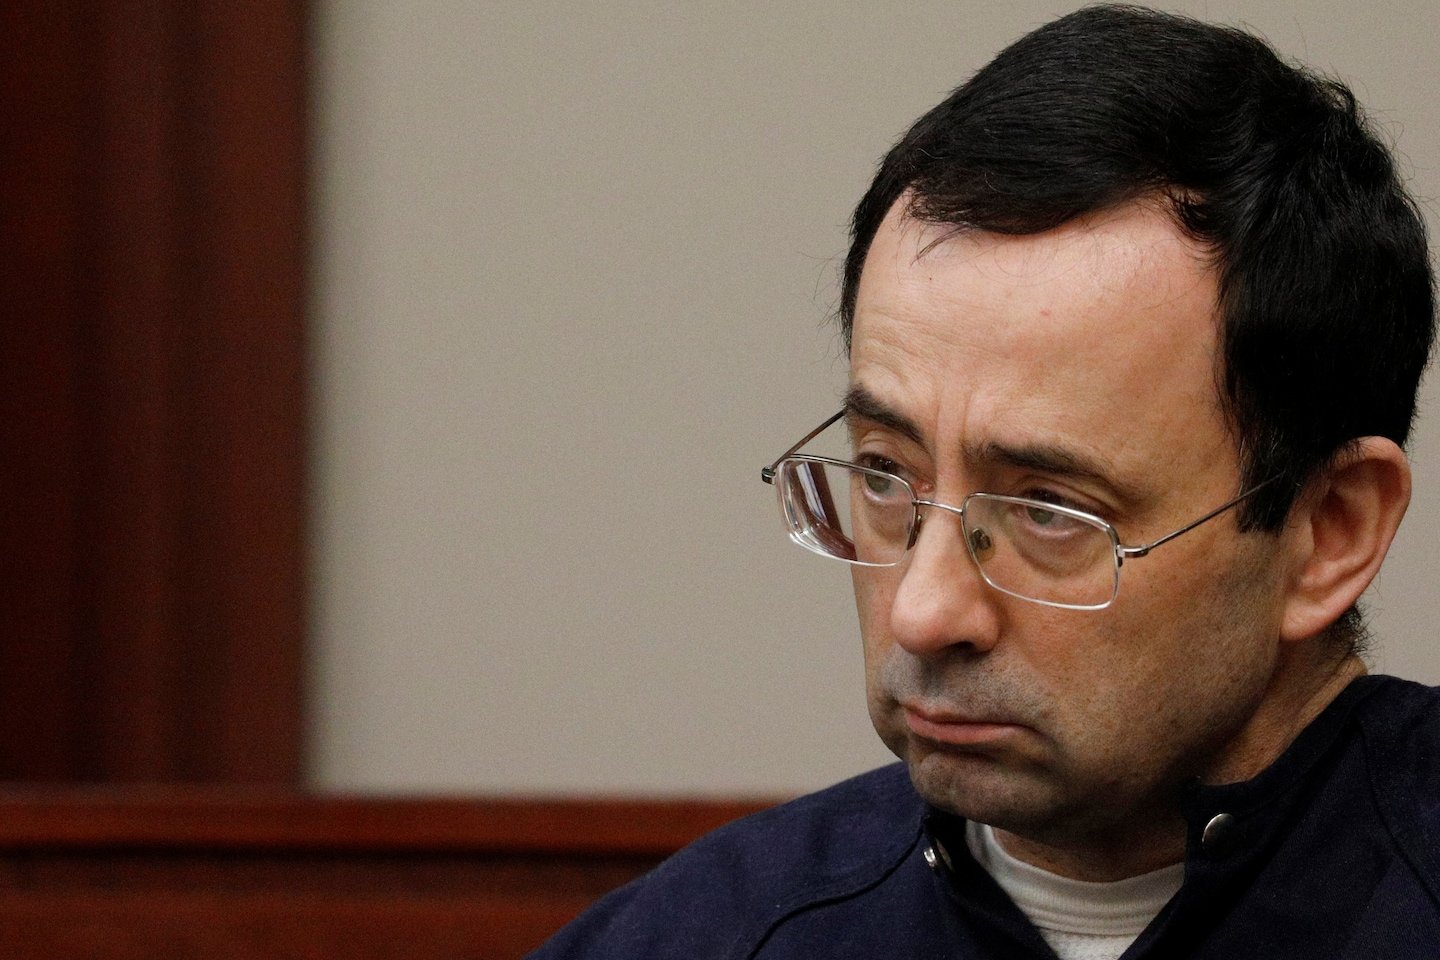 Larry Nassar, former USA Gymnastics doctor, sentenced to 40-175 years for sex crimes